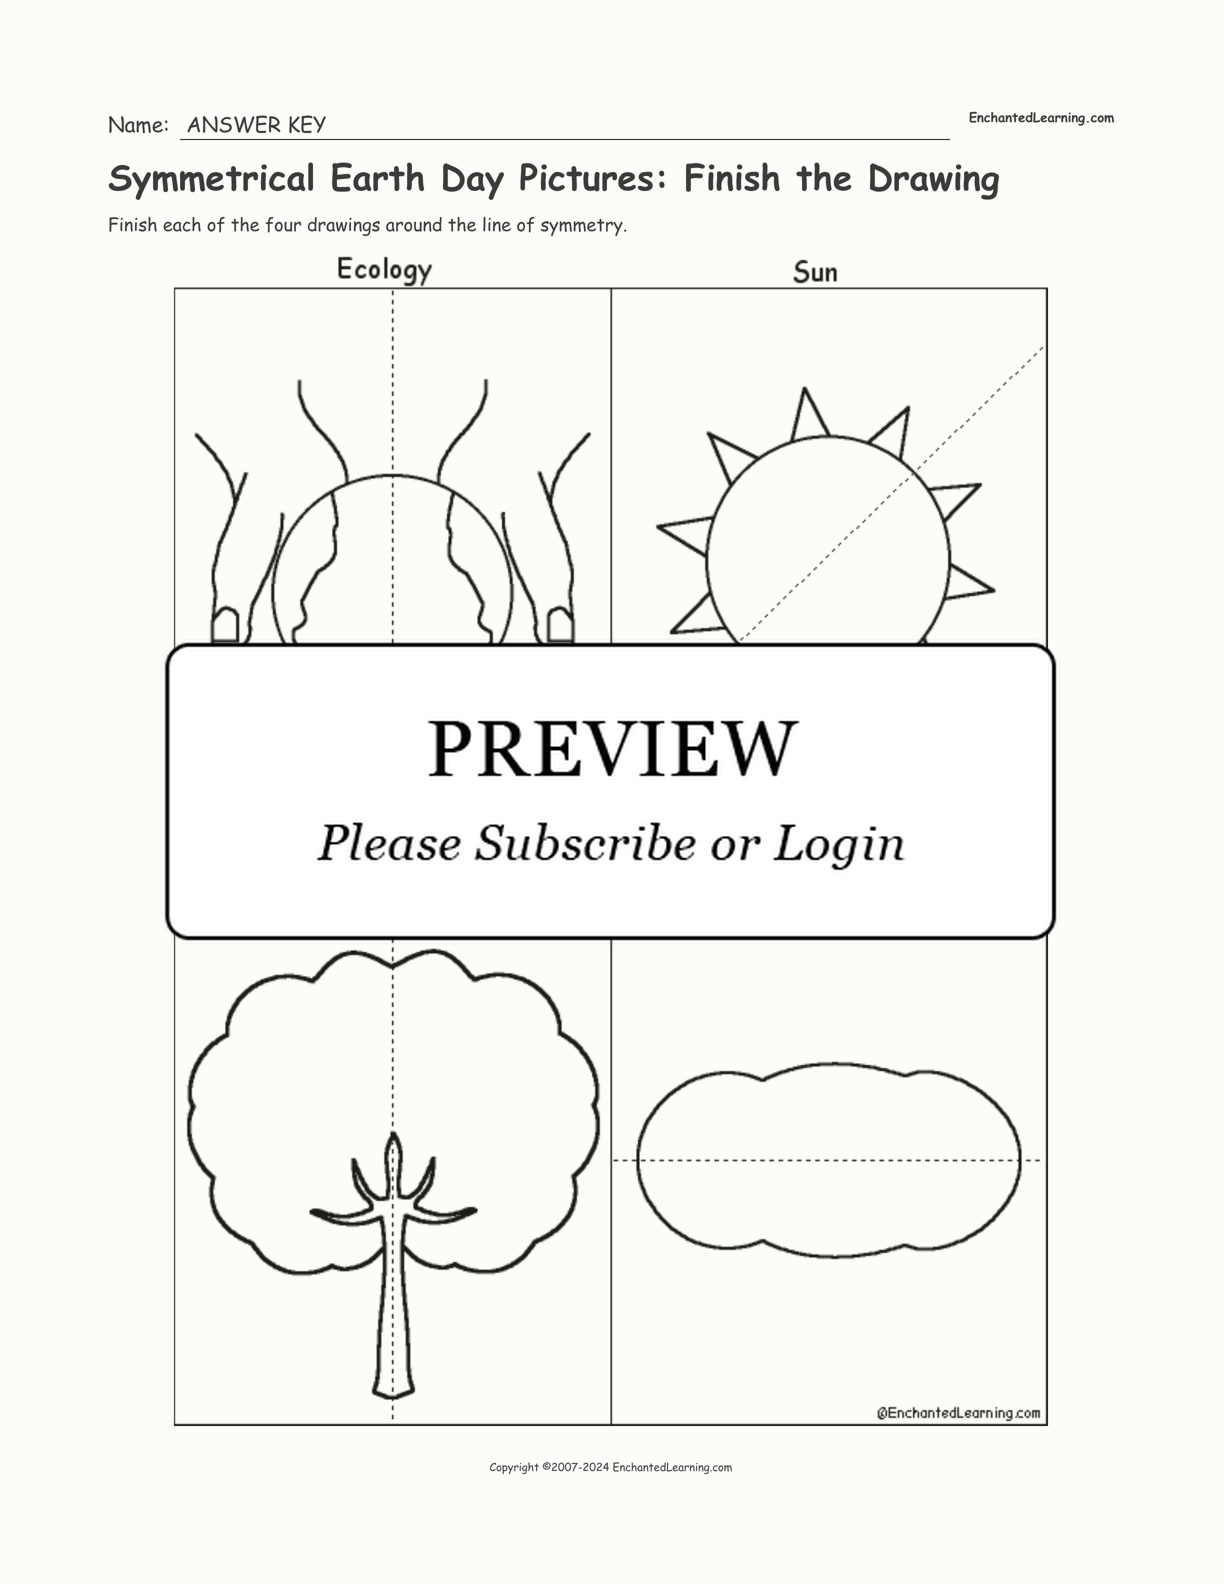 Symmetrical Earth Day Pictures: Finish the Drawing interactive worksheet page 2